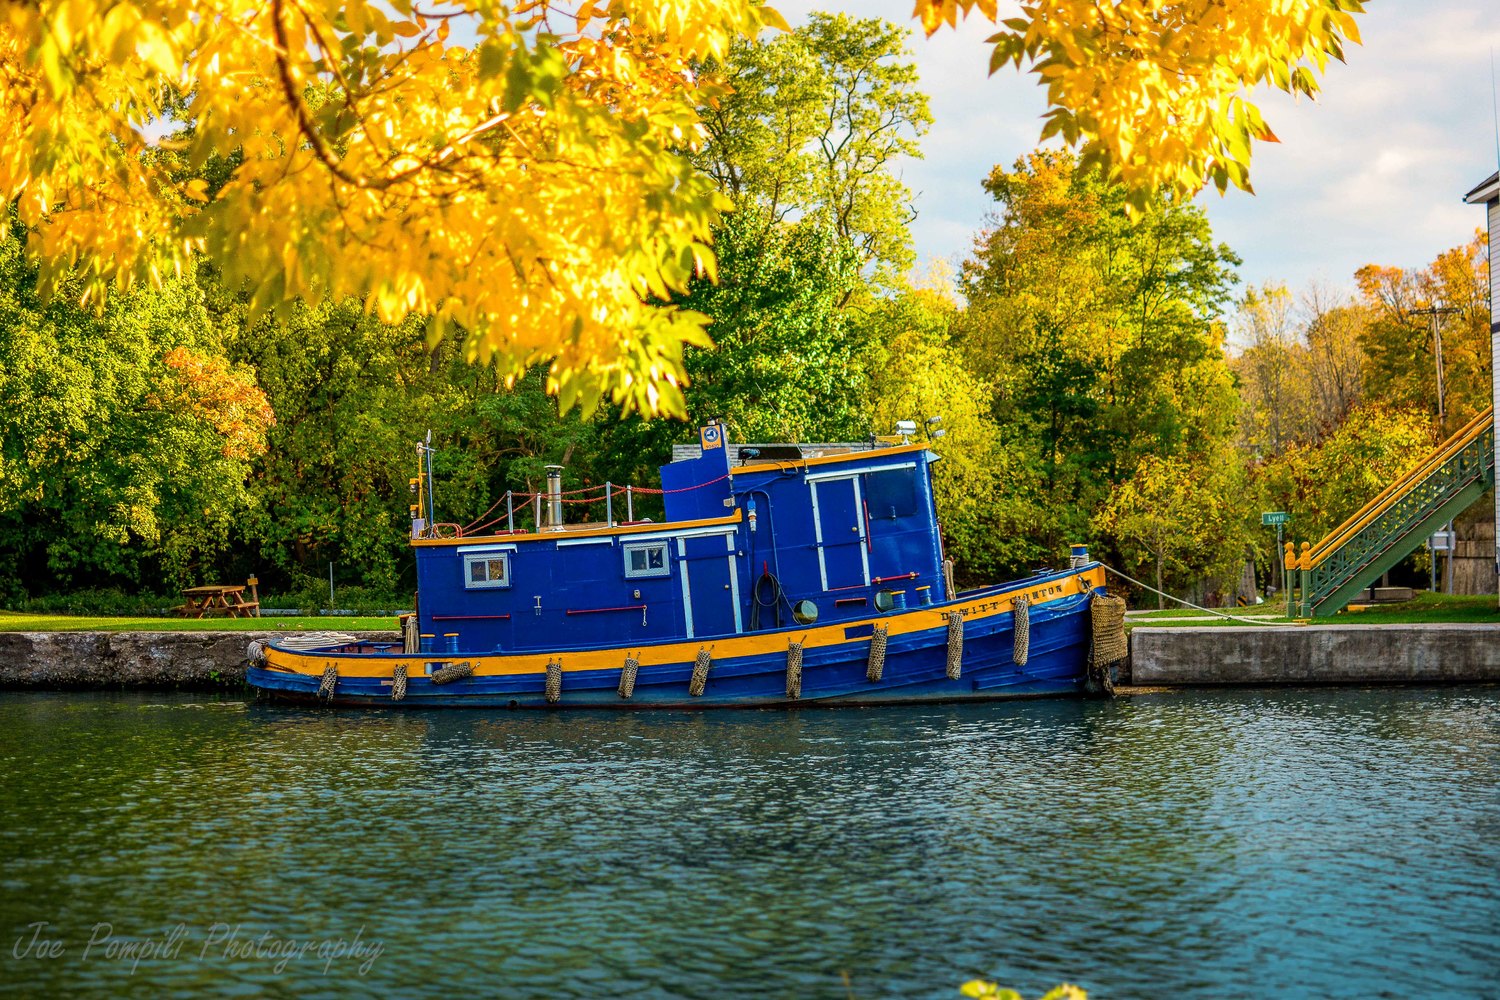 The Erie Canal in Fall. Photo Credit: Joe Pompili Photography